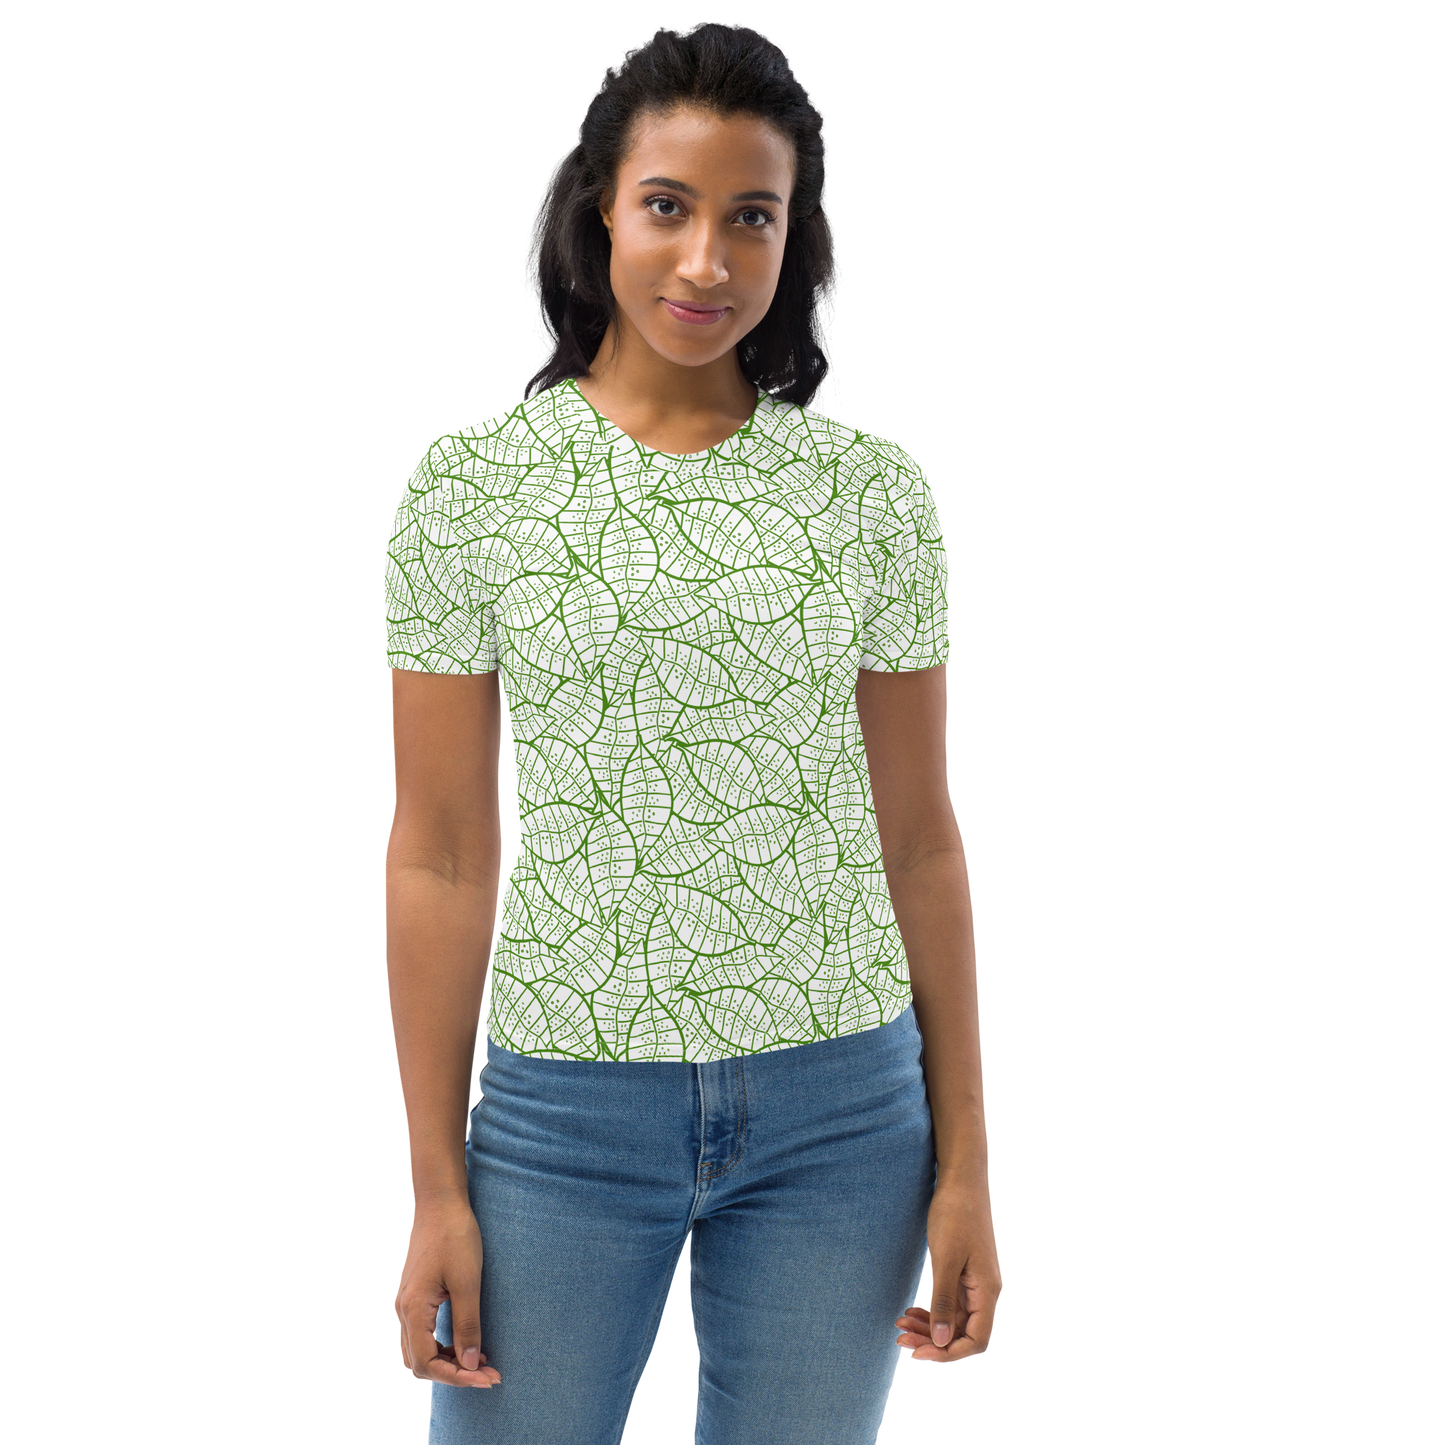 Colorful Fall Leaves | Seamless Patterns | All-Over Print Women's Crew Neck T-Shirt - #4